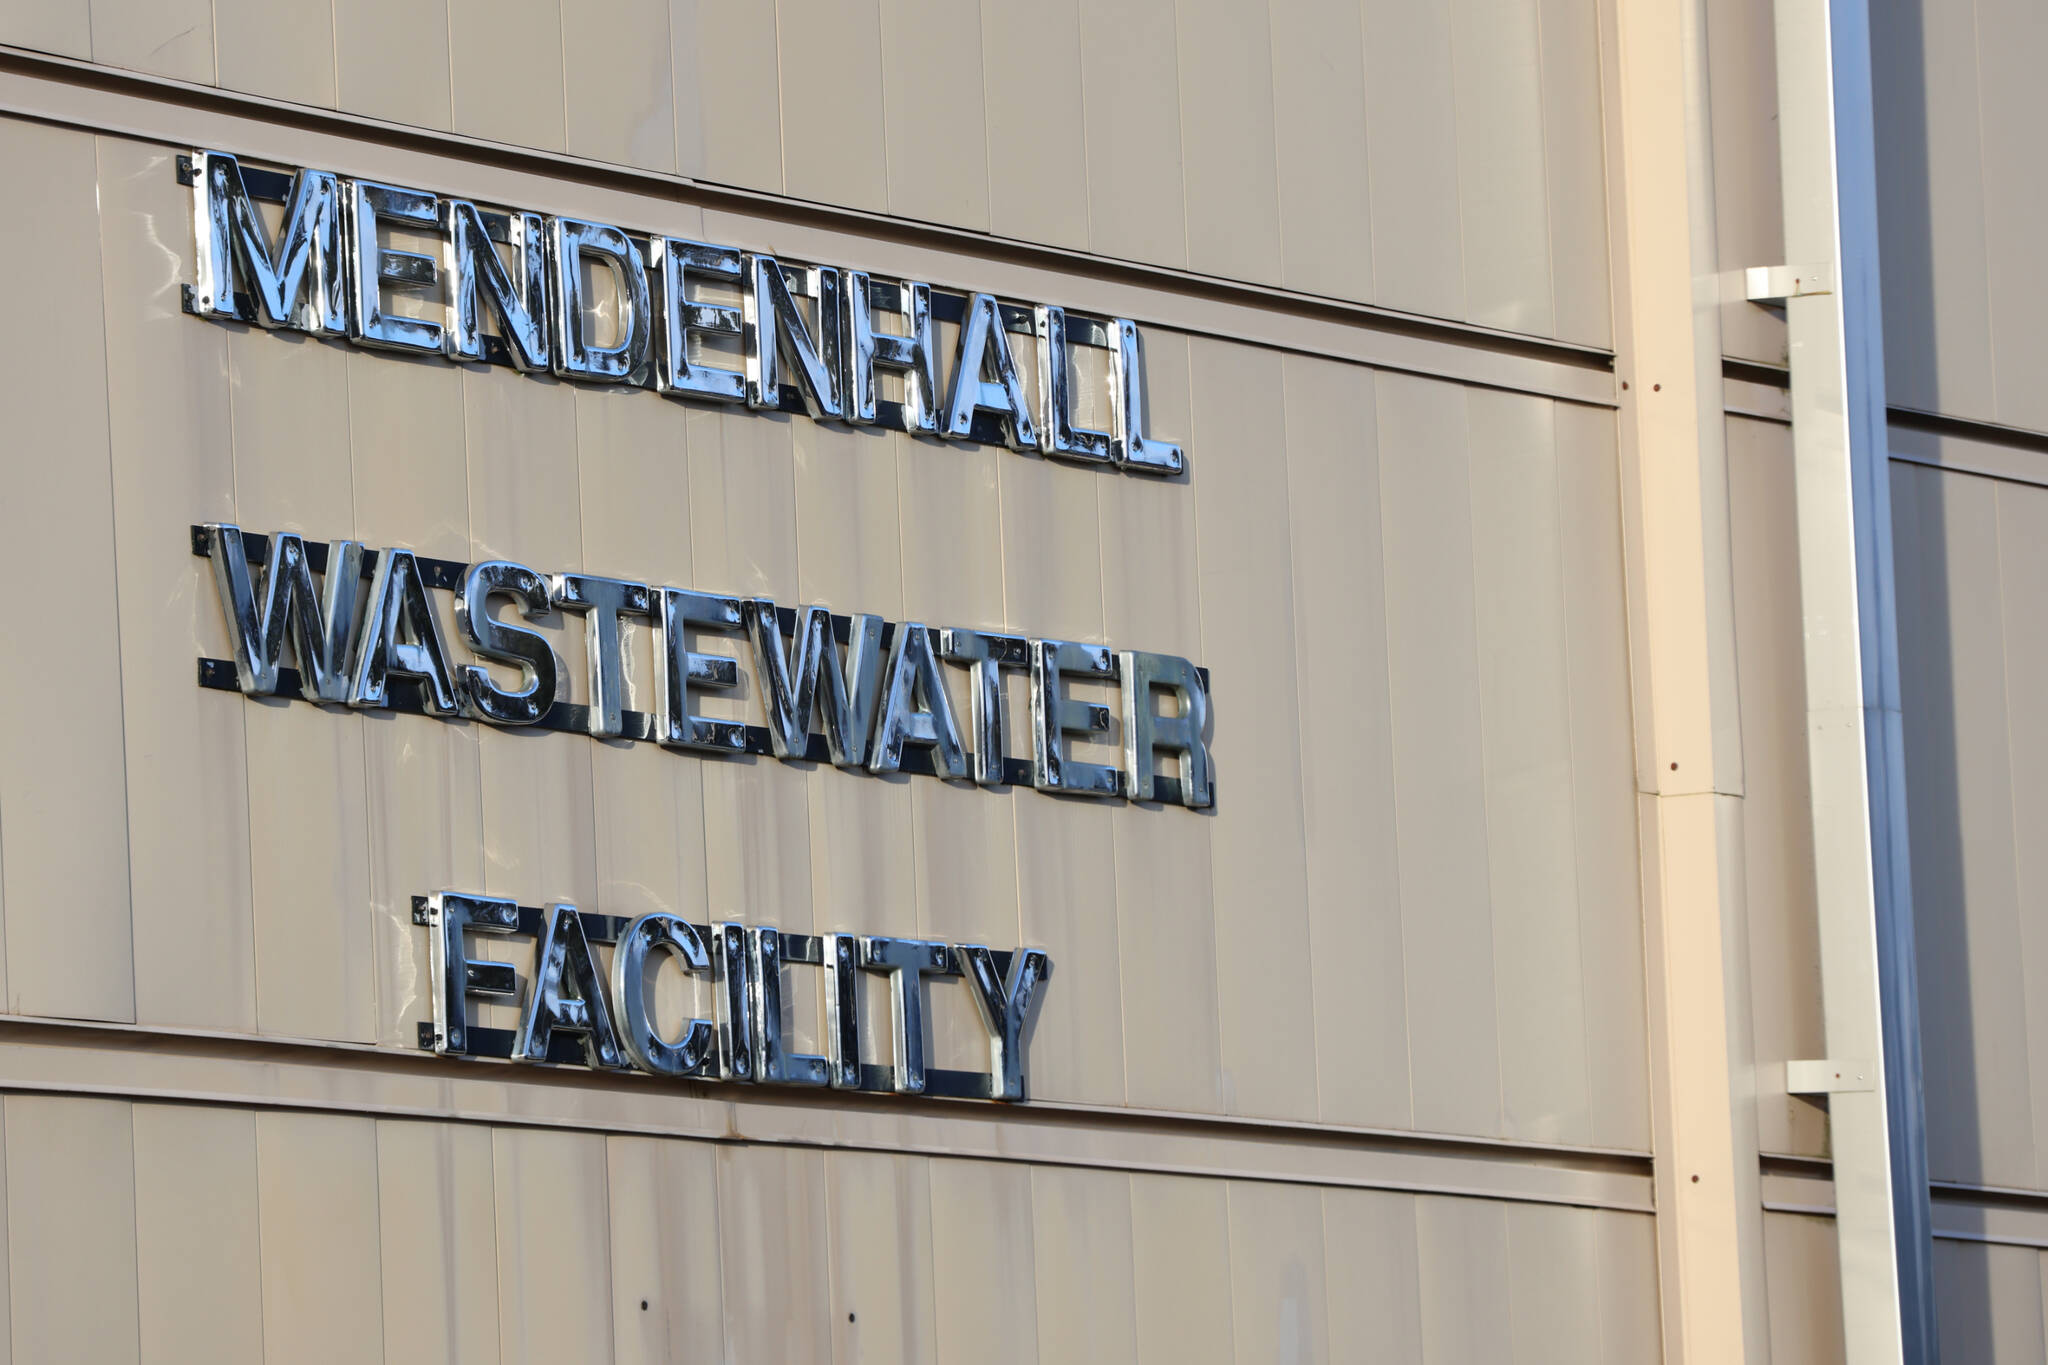 Sun shines on the Mendenhall Wastewater Facility, which has emerged as a possible top 10 legislative priority for the City and Borough of Juneau. (Ben Hohenstatt / Juneau Empire)